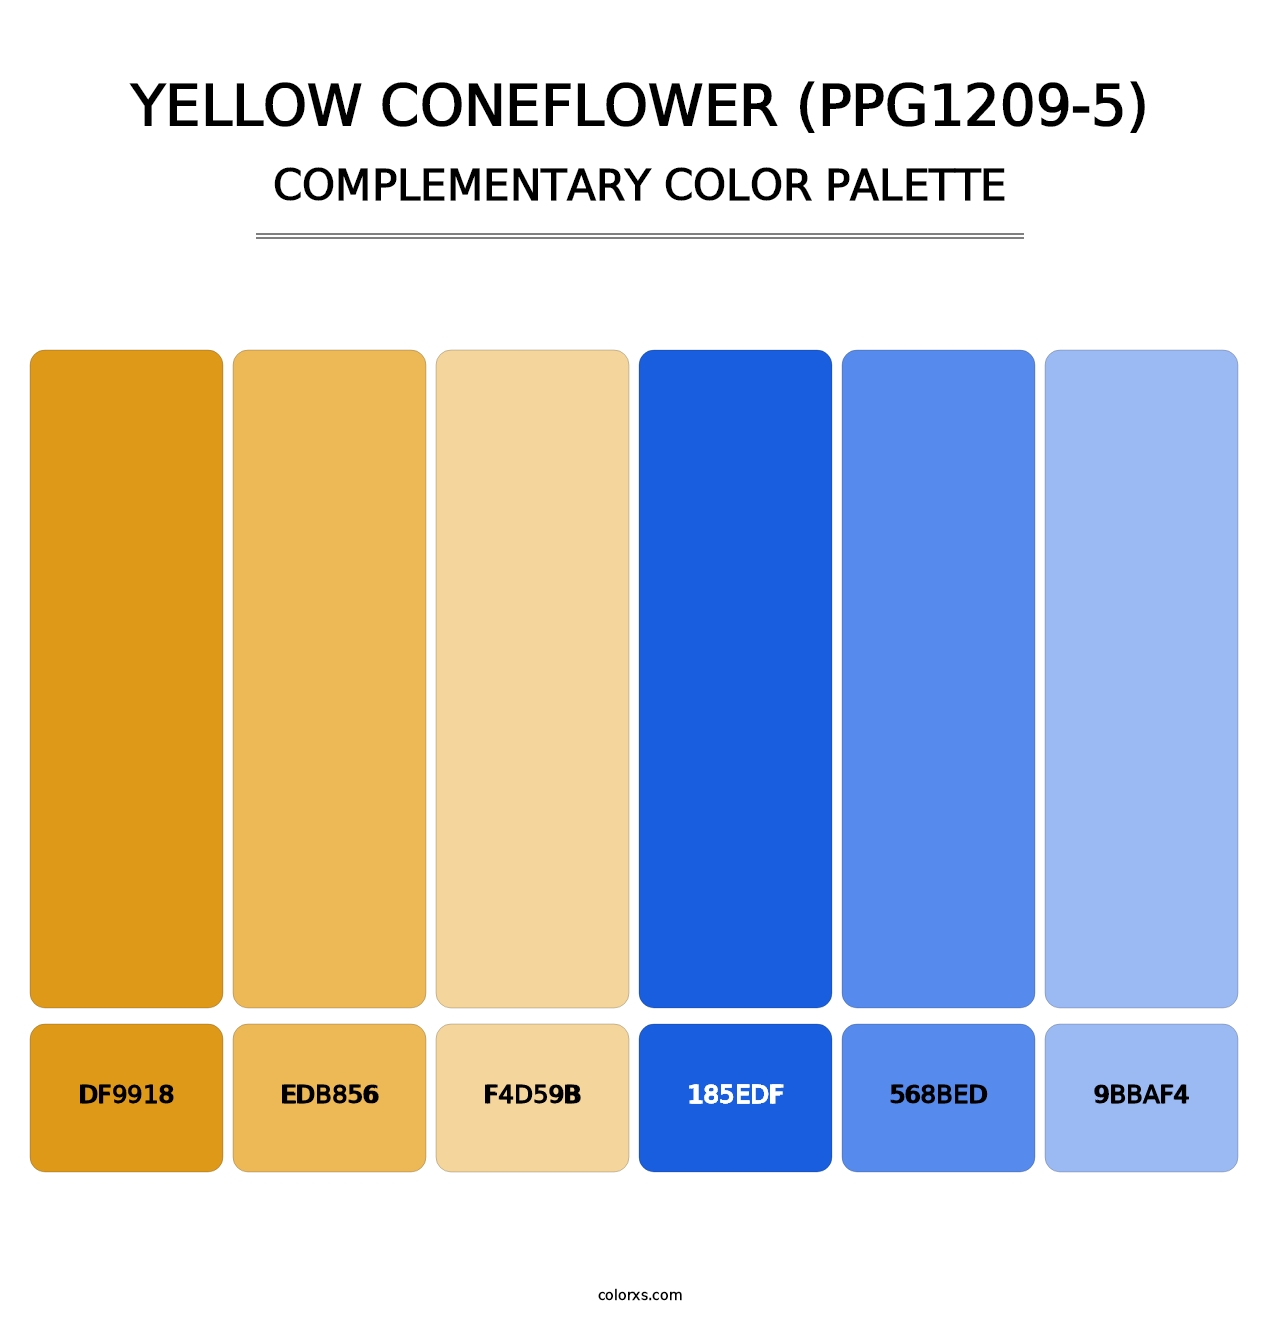 Yellow Coneflower (PPG1209-5) - Complementary Color Palette